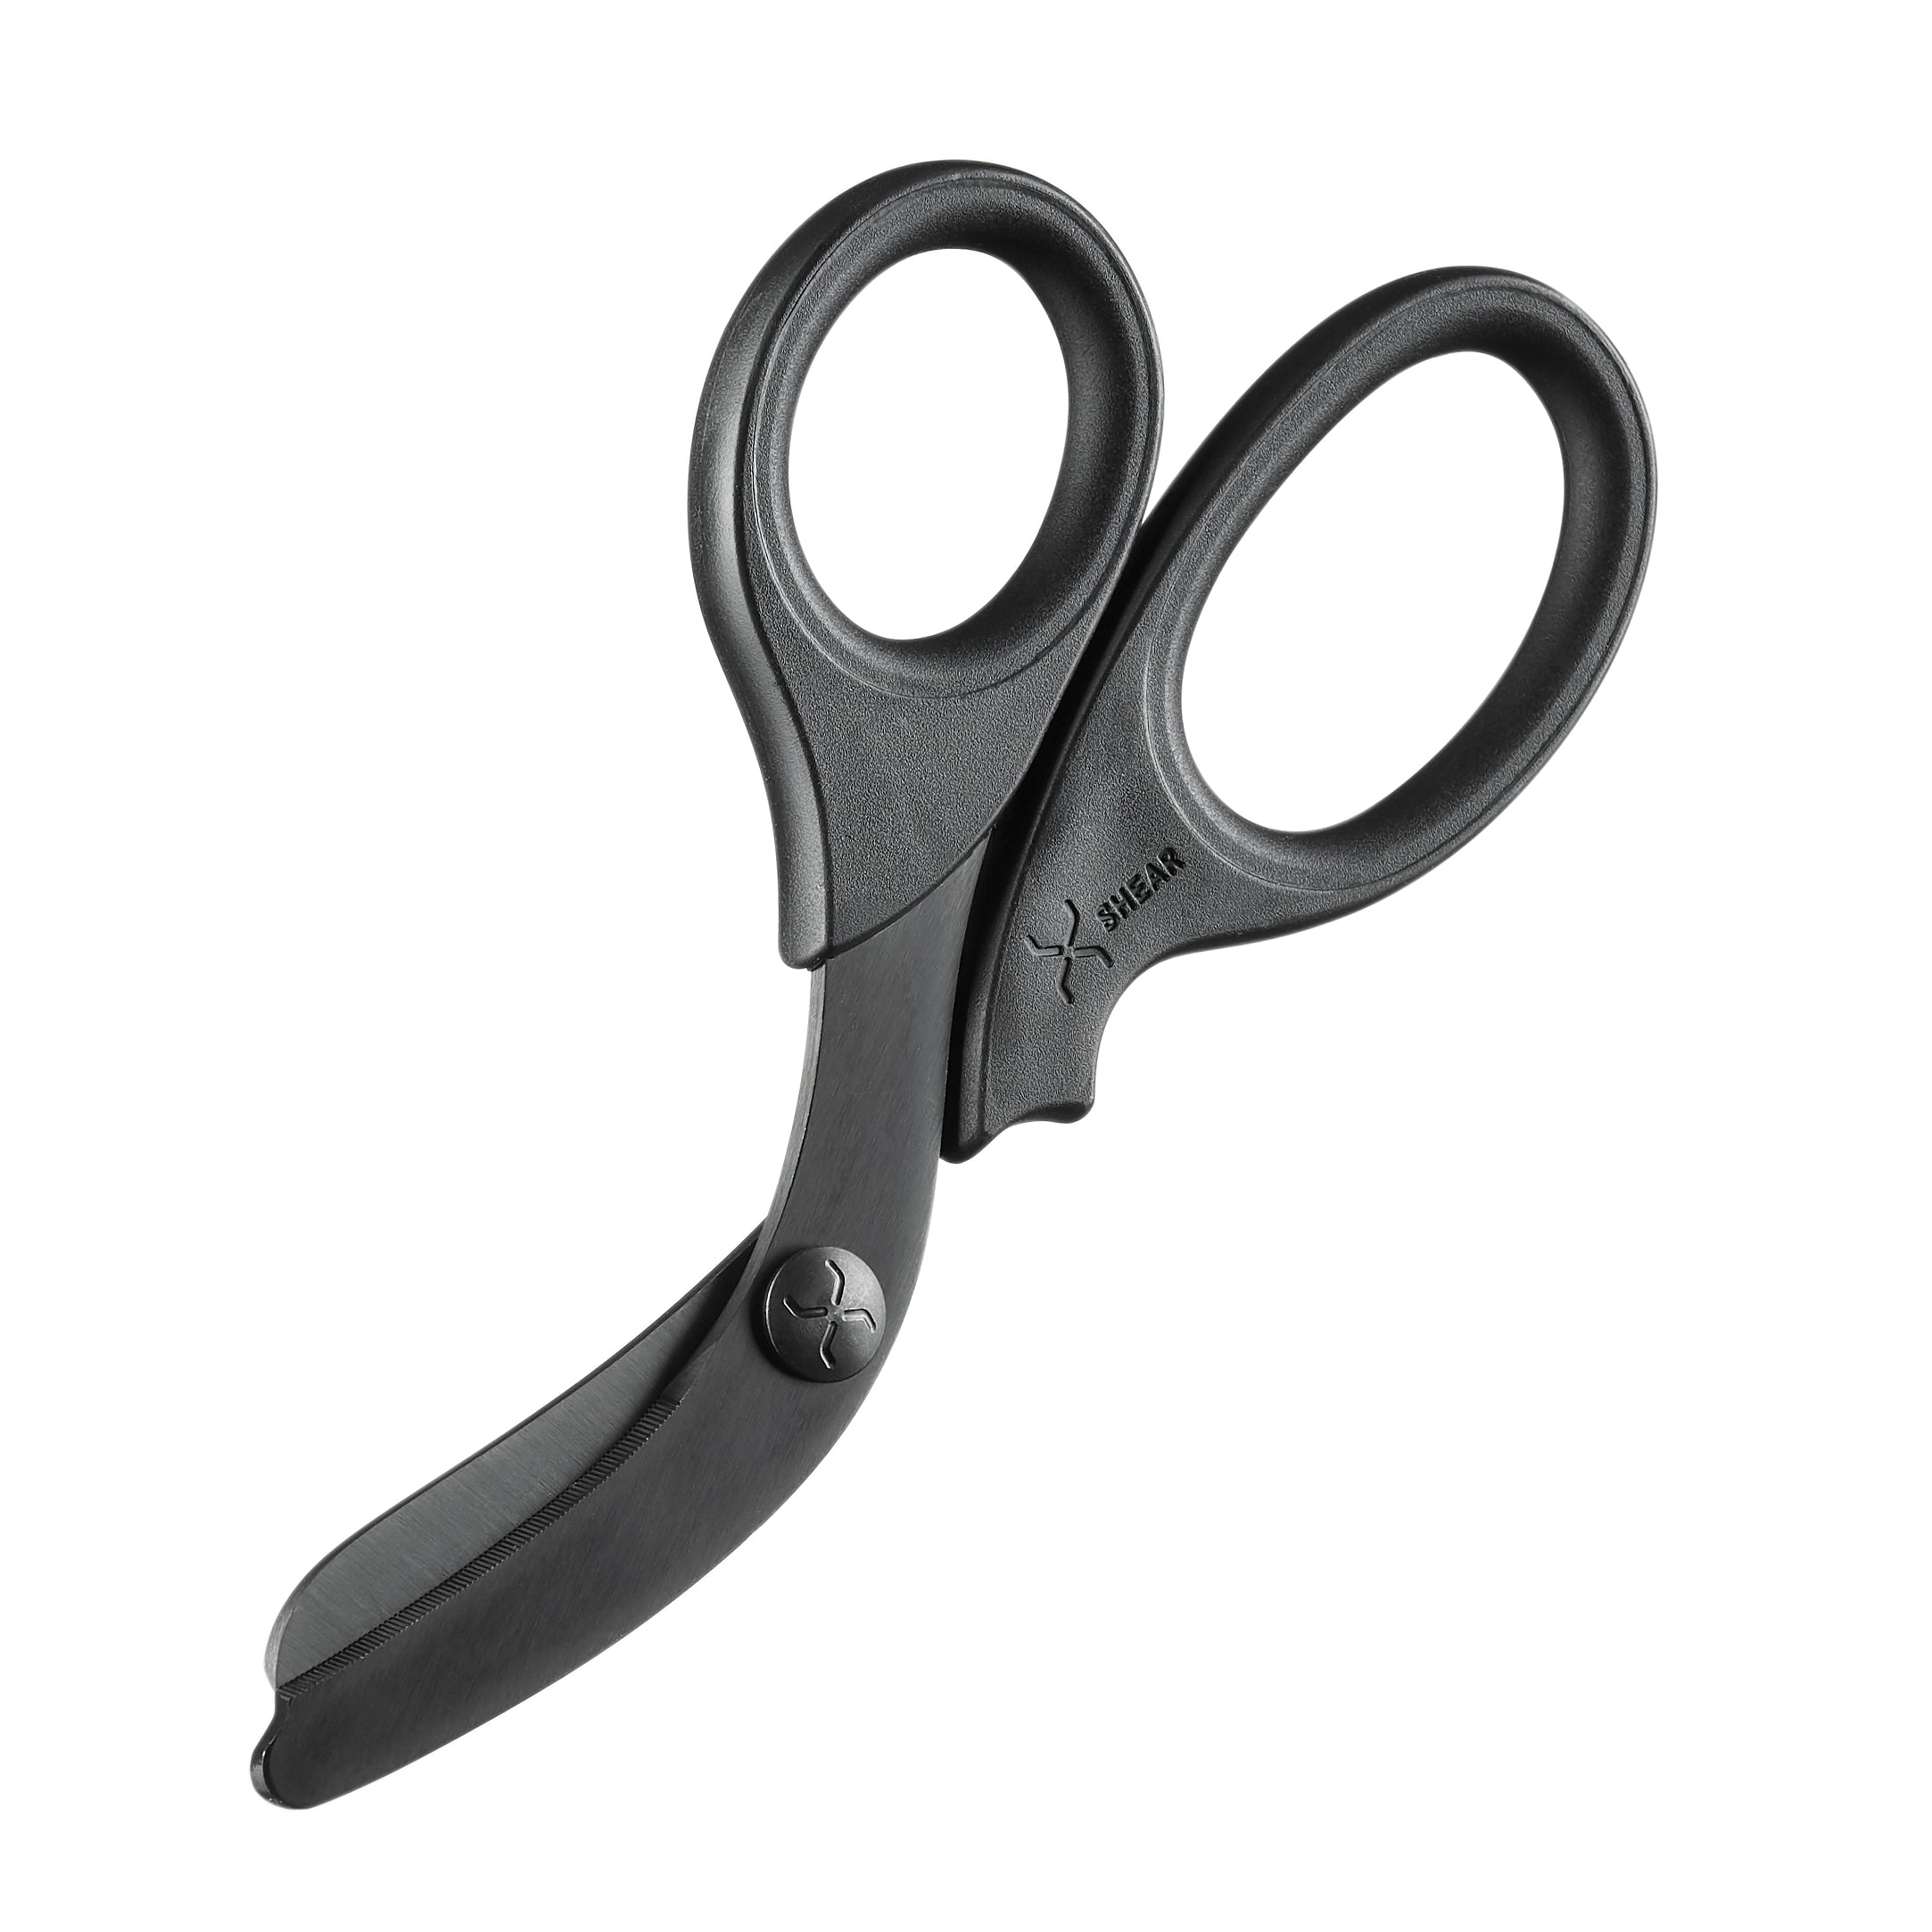 XShear 7.5” Heavy Duty Trauma Shears. All Black Handles - Black Titanium Coated Stainless Steel Blades - for The Professional Emergency Provider